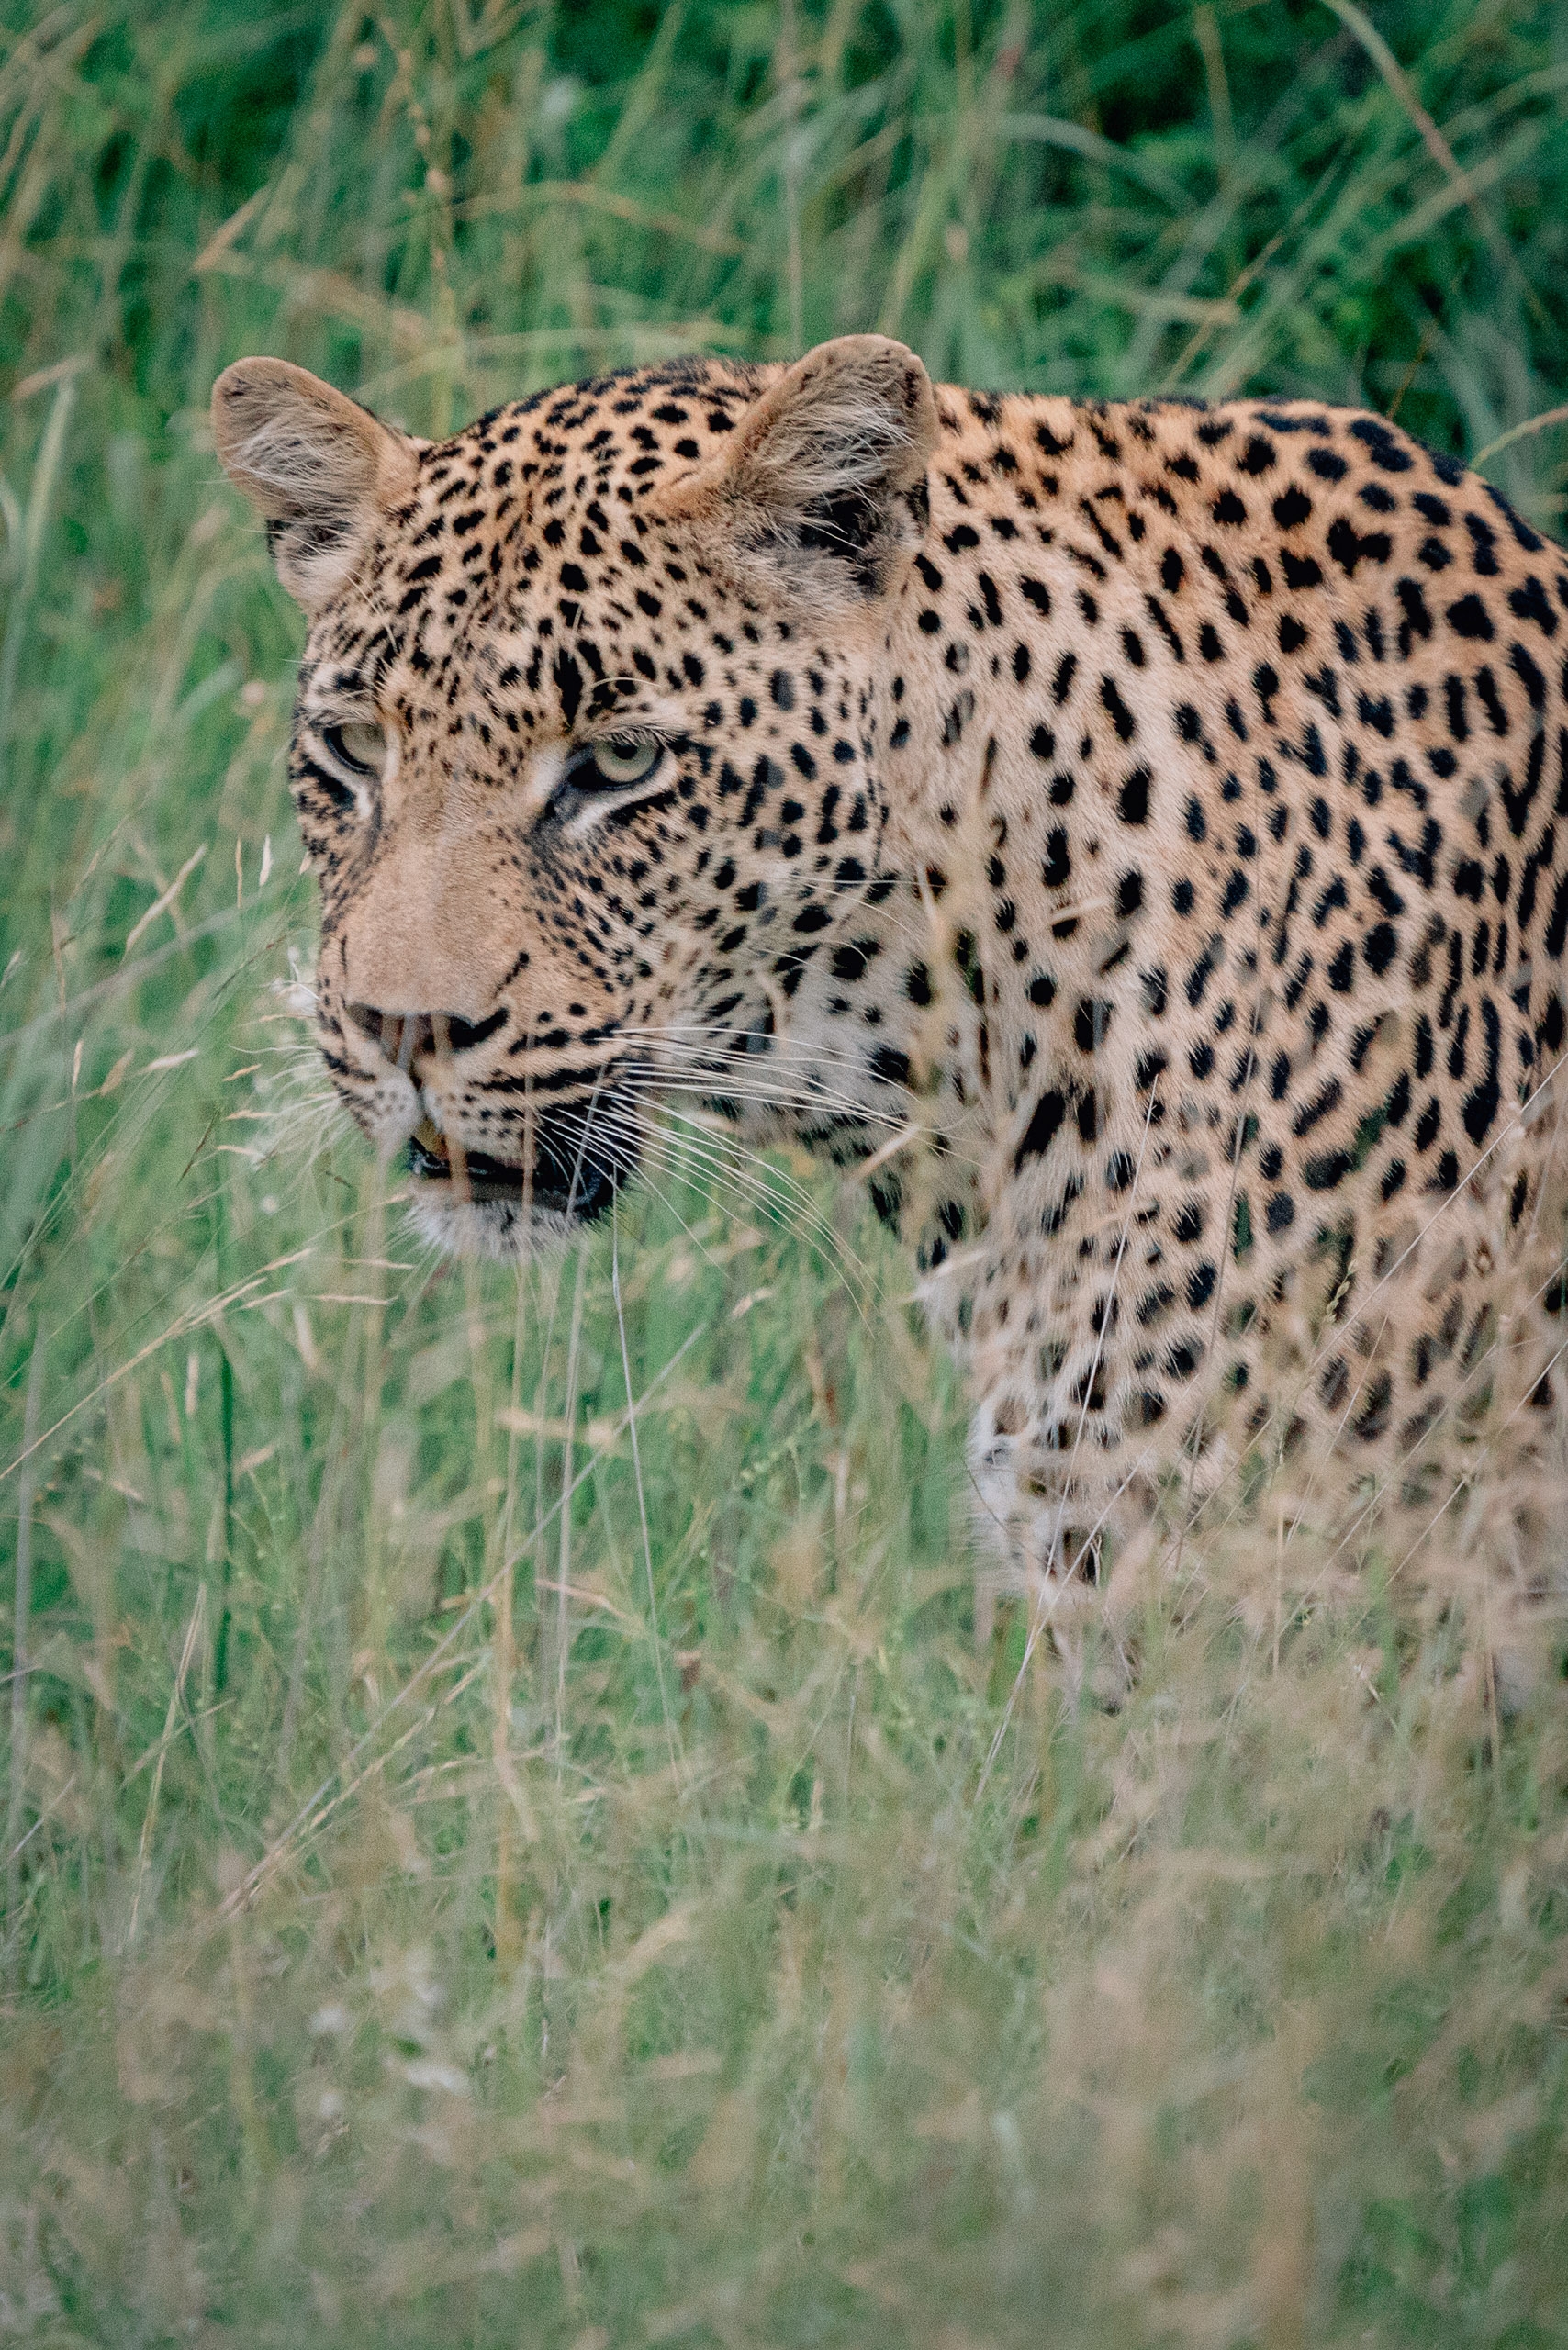 Tracking a Leopard